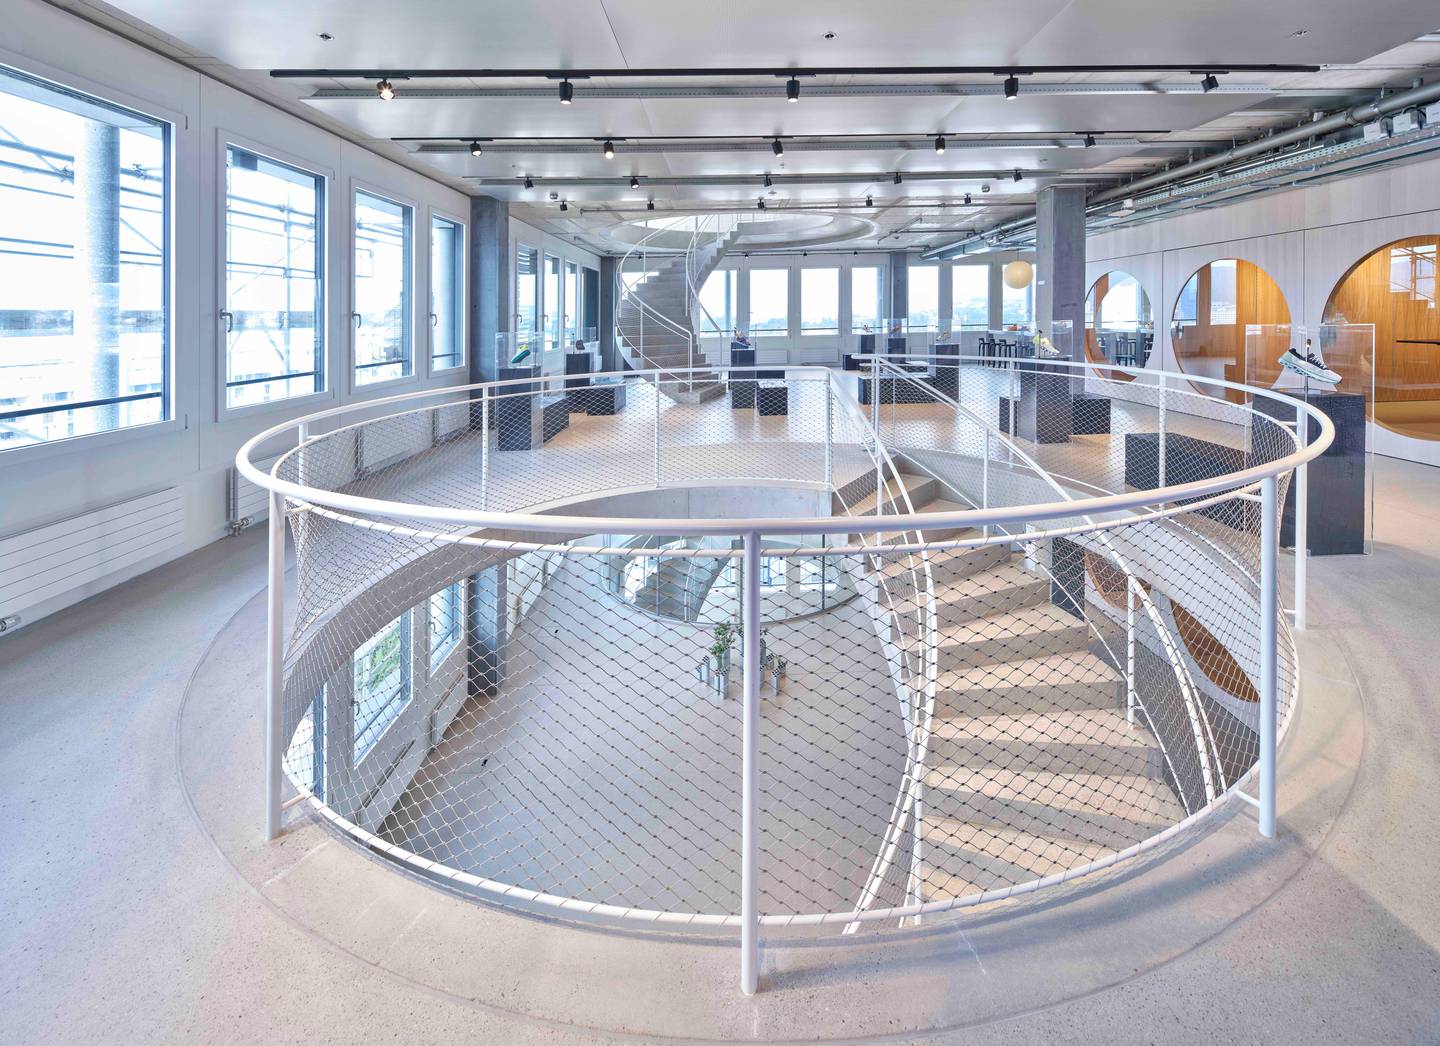 On, the running shoe brand based in Zurich, Switzerland, this year opened its new 17-story office space equipped with a central staircase dubbed 